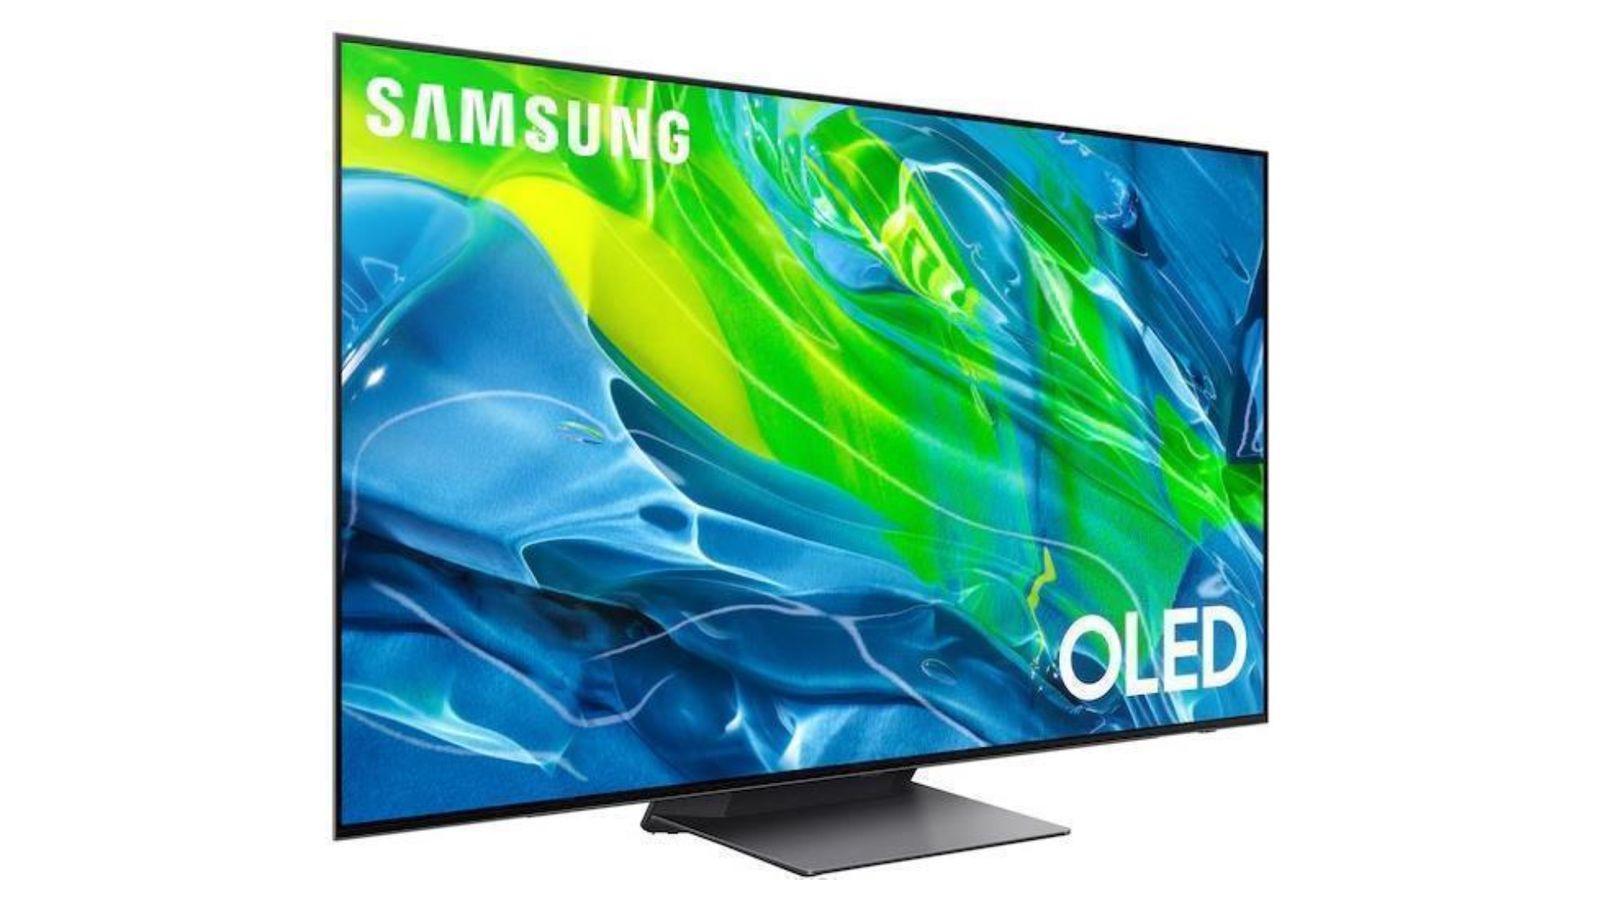 Best TV brands - Samsung S95B product image of a black Samsung TV featuring a green and blue water pattern on the display.